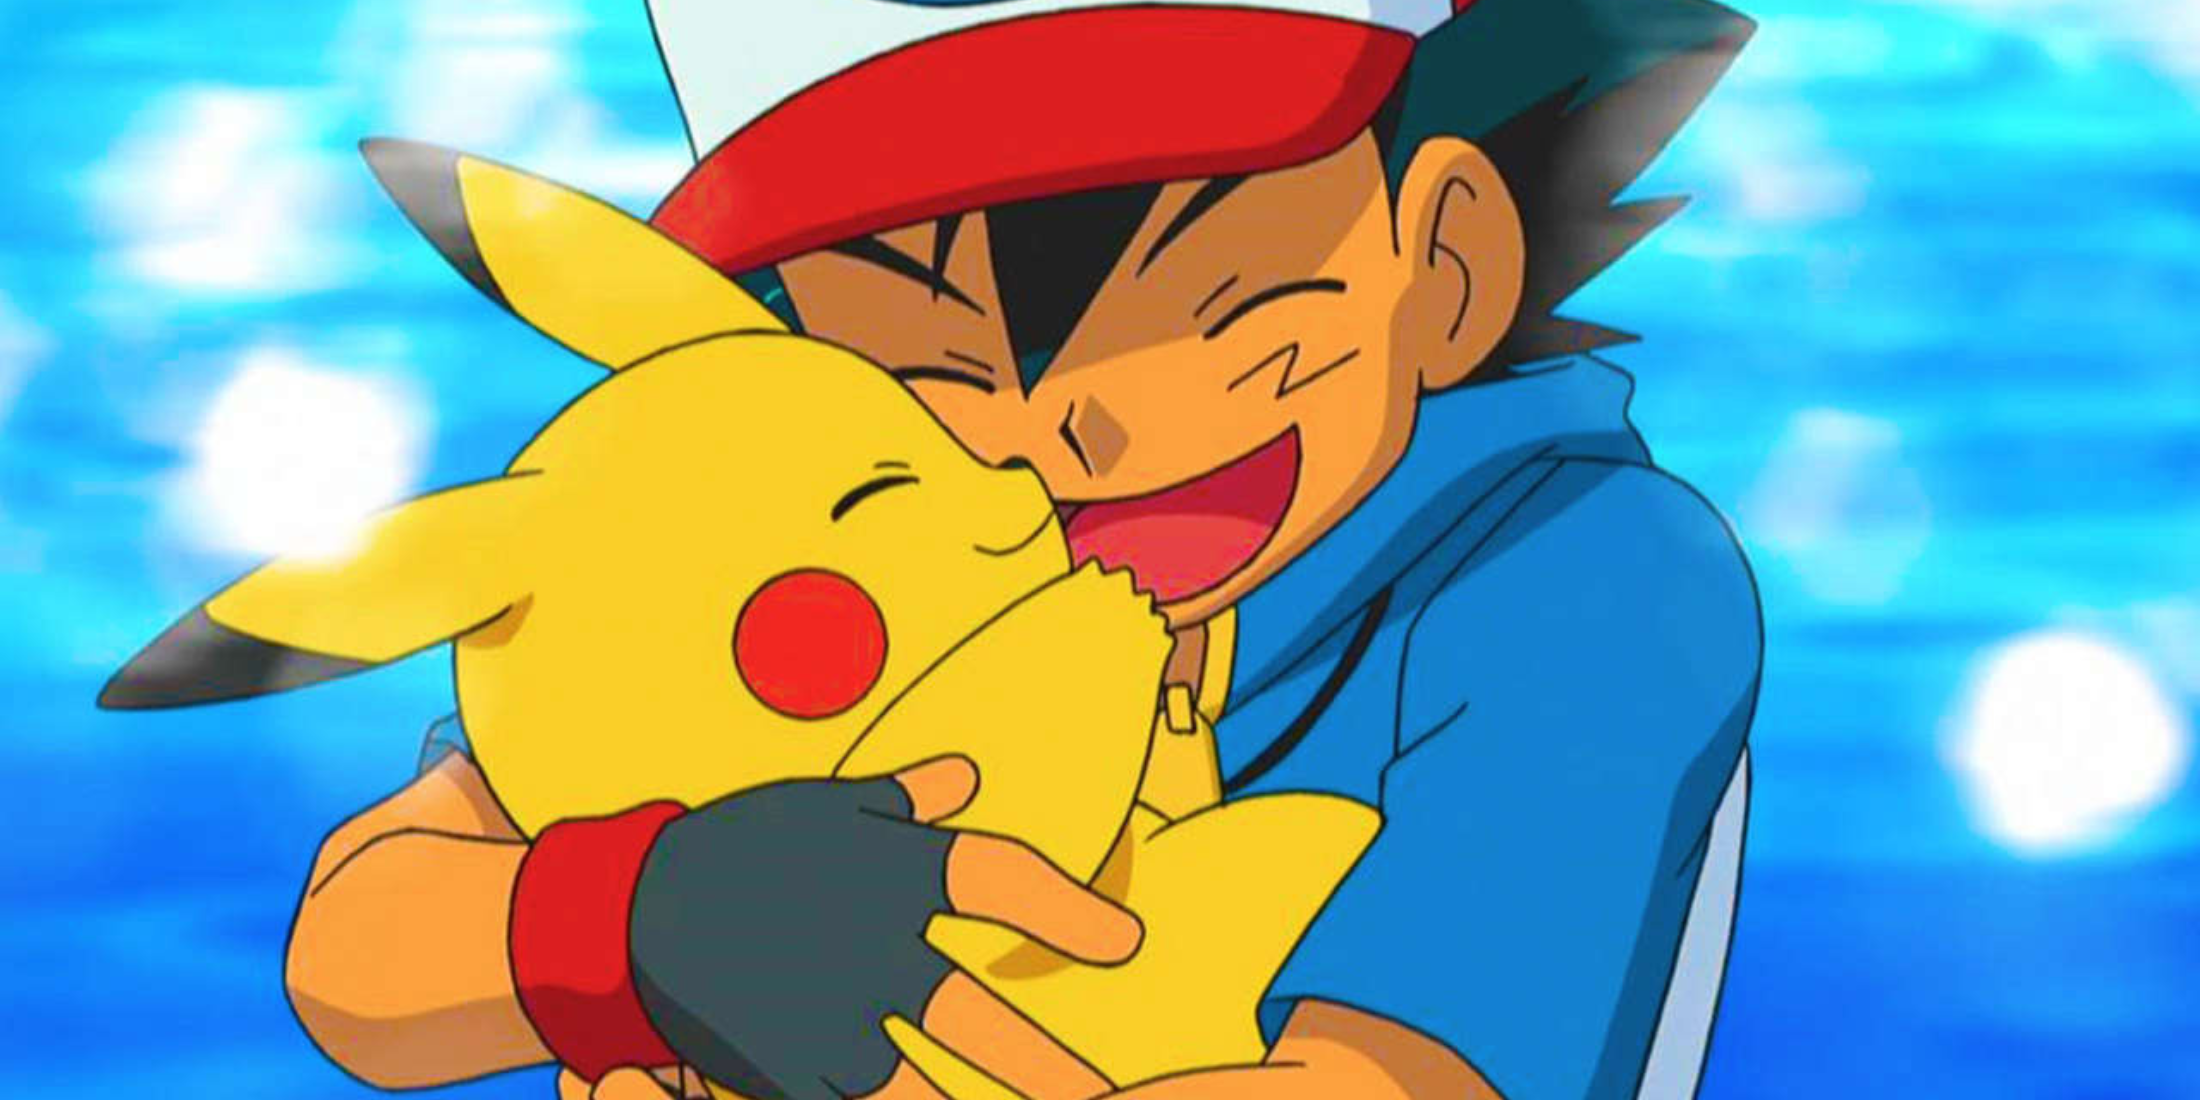 Pokémon Says Goodbye to Ash and Pikachu and Reveals A New Series